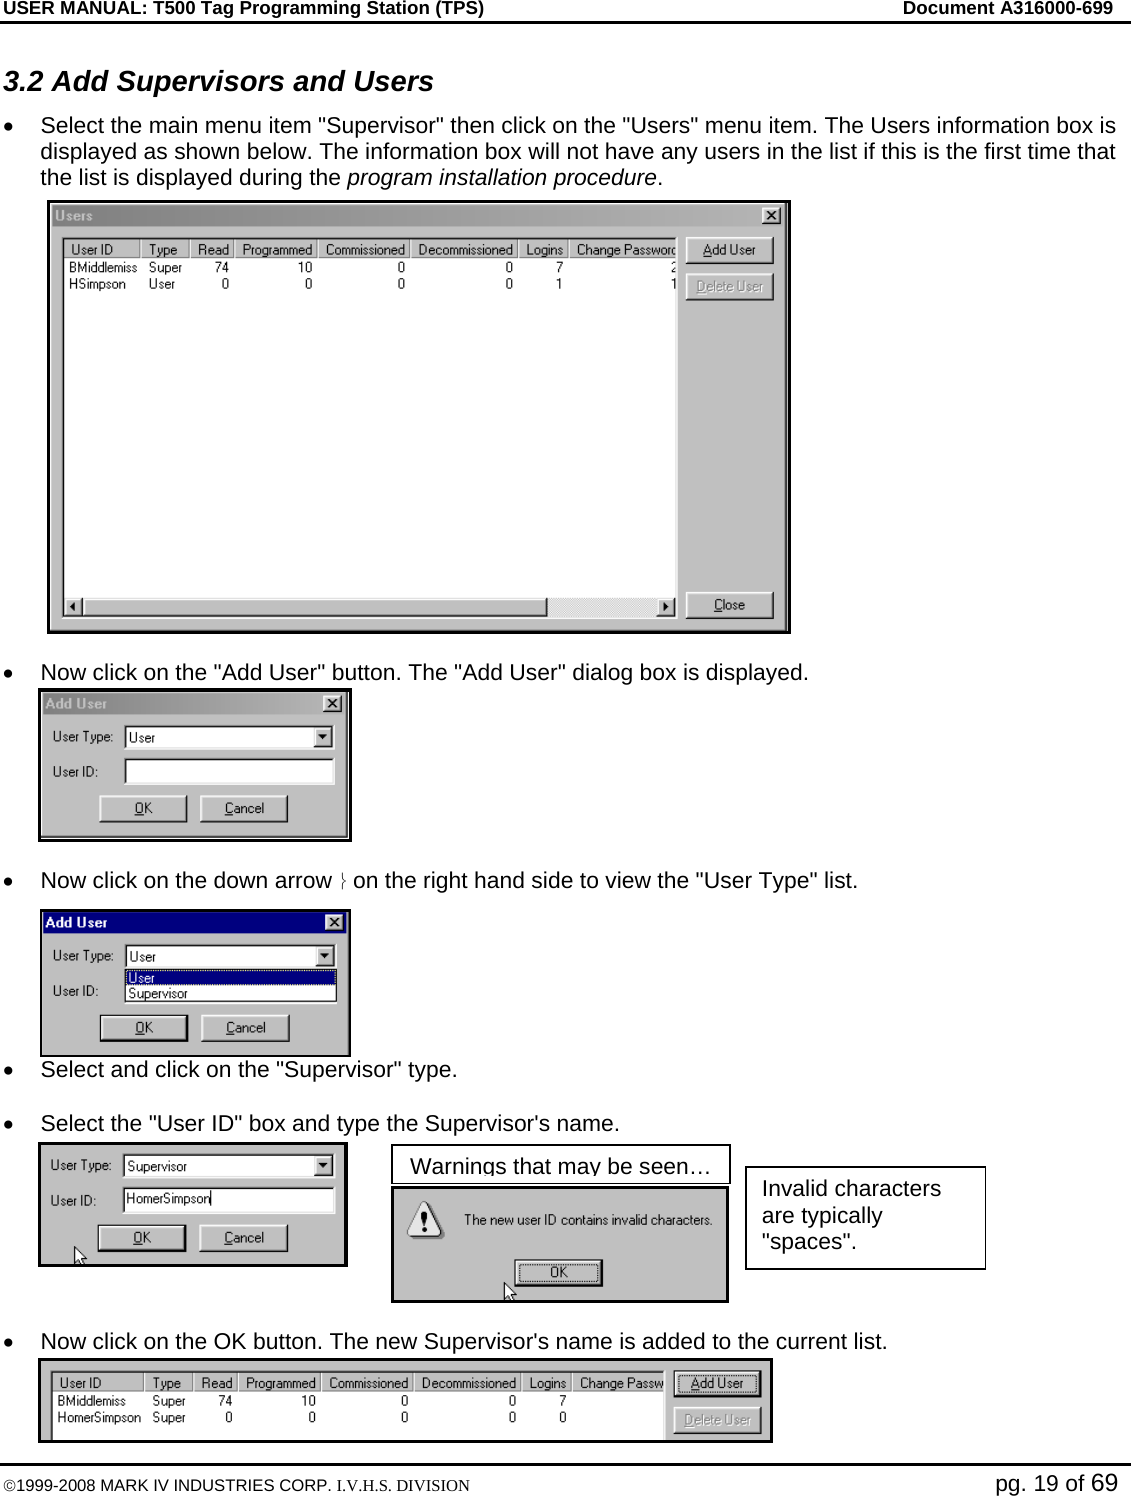 USER MANUAL: T500 Tag Programming Station (TPS)     Document A316000-699  ©1999-2008 MARK IV INDUSTRIES CORP. I.V.H.S. DIVISION   pg. 19 of 69 3.2 Add Supervisors and Users •  Select the main menu item &quot;Supervisor&quot; then click on the &quot;Users&quot; menu item. The Users information box is displayed as shown below. The information box will not have any users in the list if this is the first time that the list is displayed during the program installation procedure.  •  Now click on the &quot;Add User&quot; button. The &quot;Add User&quot; dialog box is displayed.  •  Now click on the down arrow ⎬ on the right hand side to view the &quot;User Type&quot; list. •  Select and click on the &quot;Supervisor&quot; type.   •  Select the &quot;User ID&quot; box and type the Supervisor&apos;s name.  •  Now click on the OK button. The new Supervisor&apos;s name is added to the current list. Invalid characters are typically &quot;spaces&quot;. Warnings that may be seen…